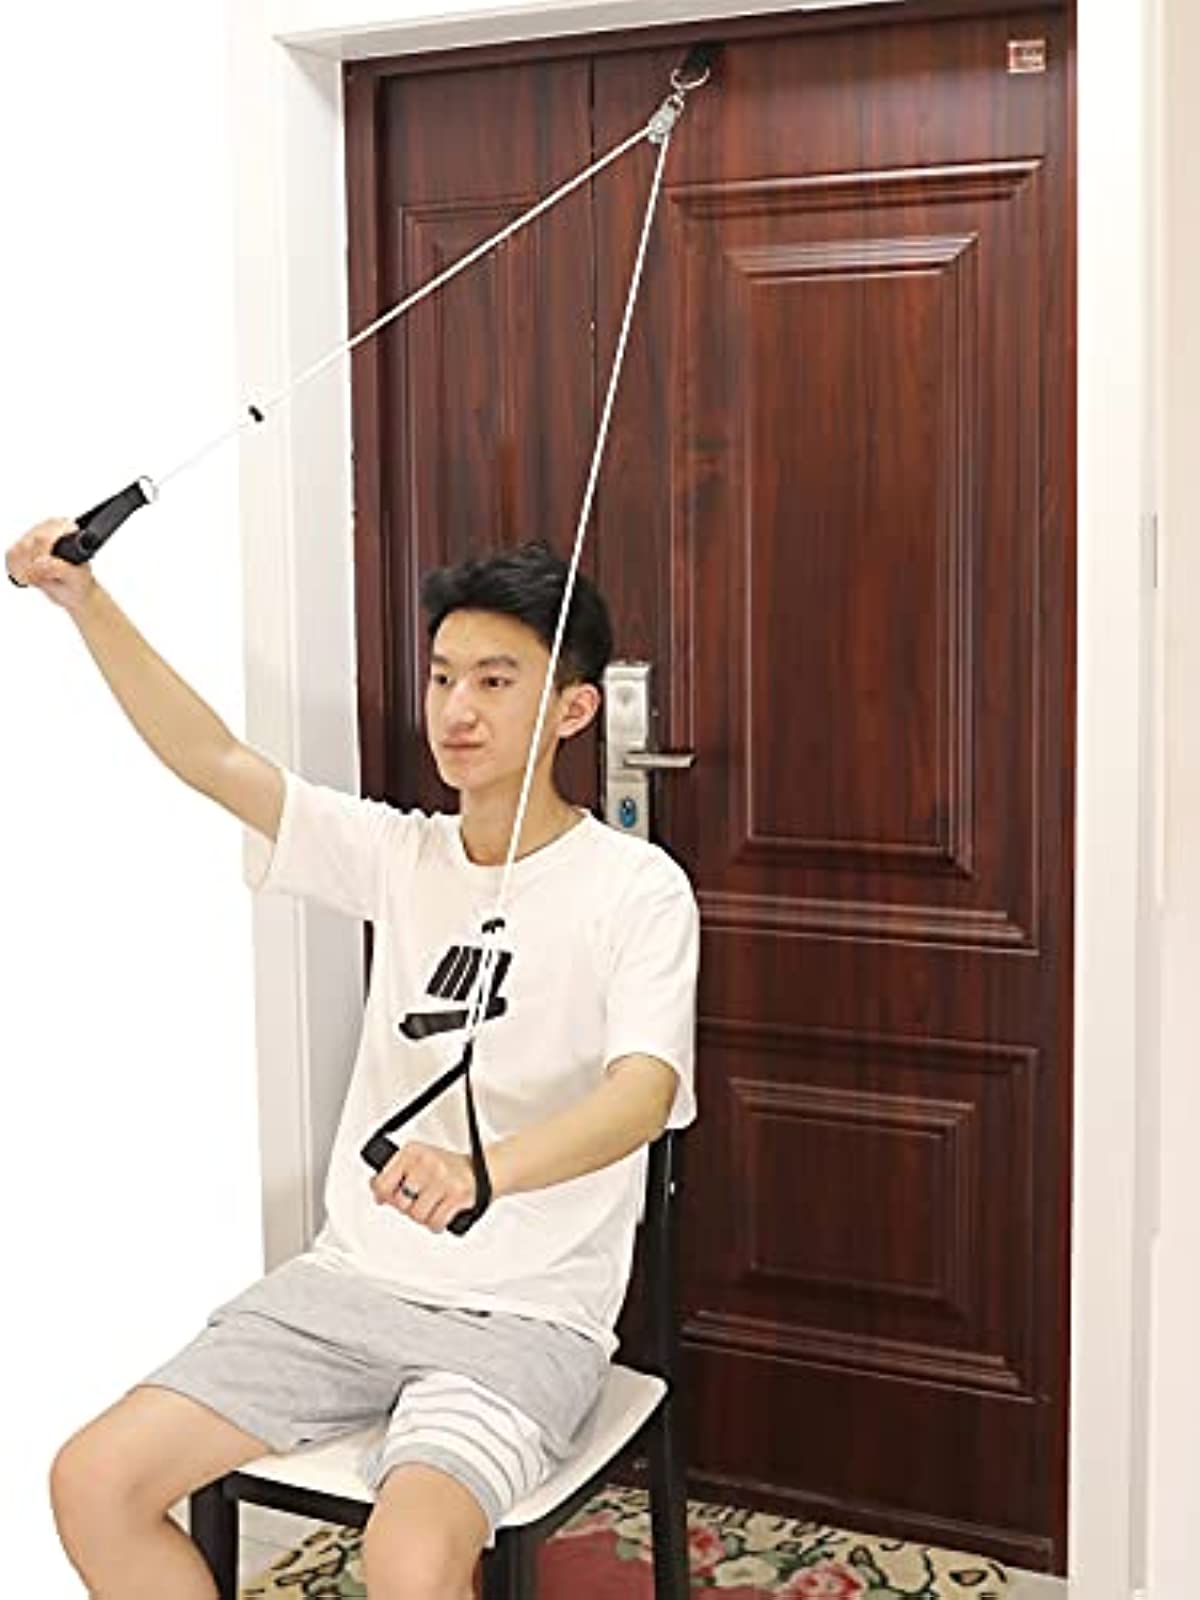 Fanwer Shoulder Pulley, Over the Door Pulley System for Shoulder Rehab, Shoulder Exercise Pulley for Physical Therapy, Assisting Rotator Cuff Recovery, Increase Flexibility Stretching, Range of Motion